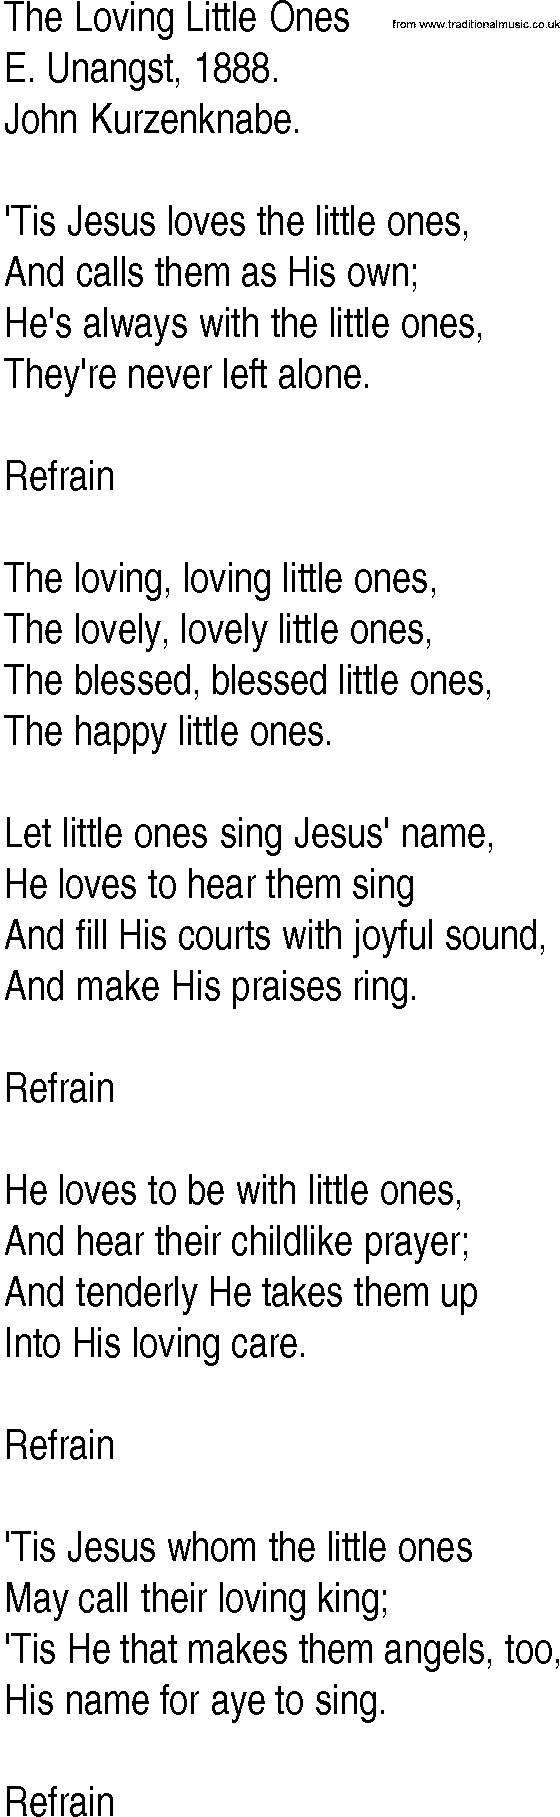 Hymn and Gospel Song: The Loving Little Ones by E Unangst lyrics